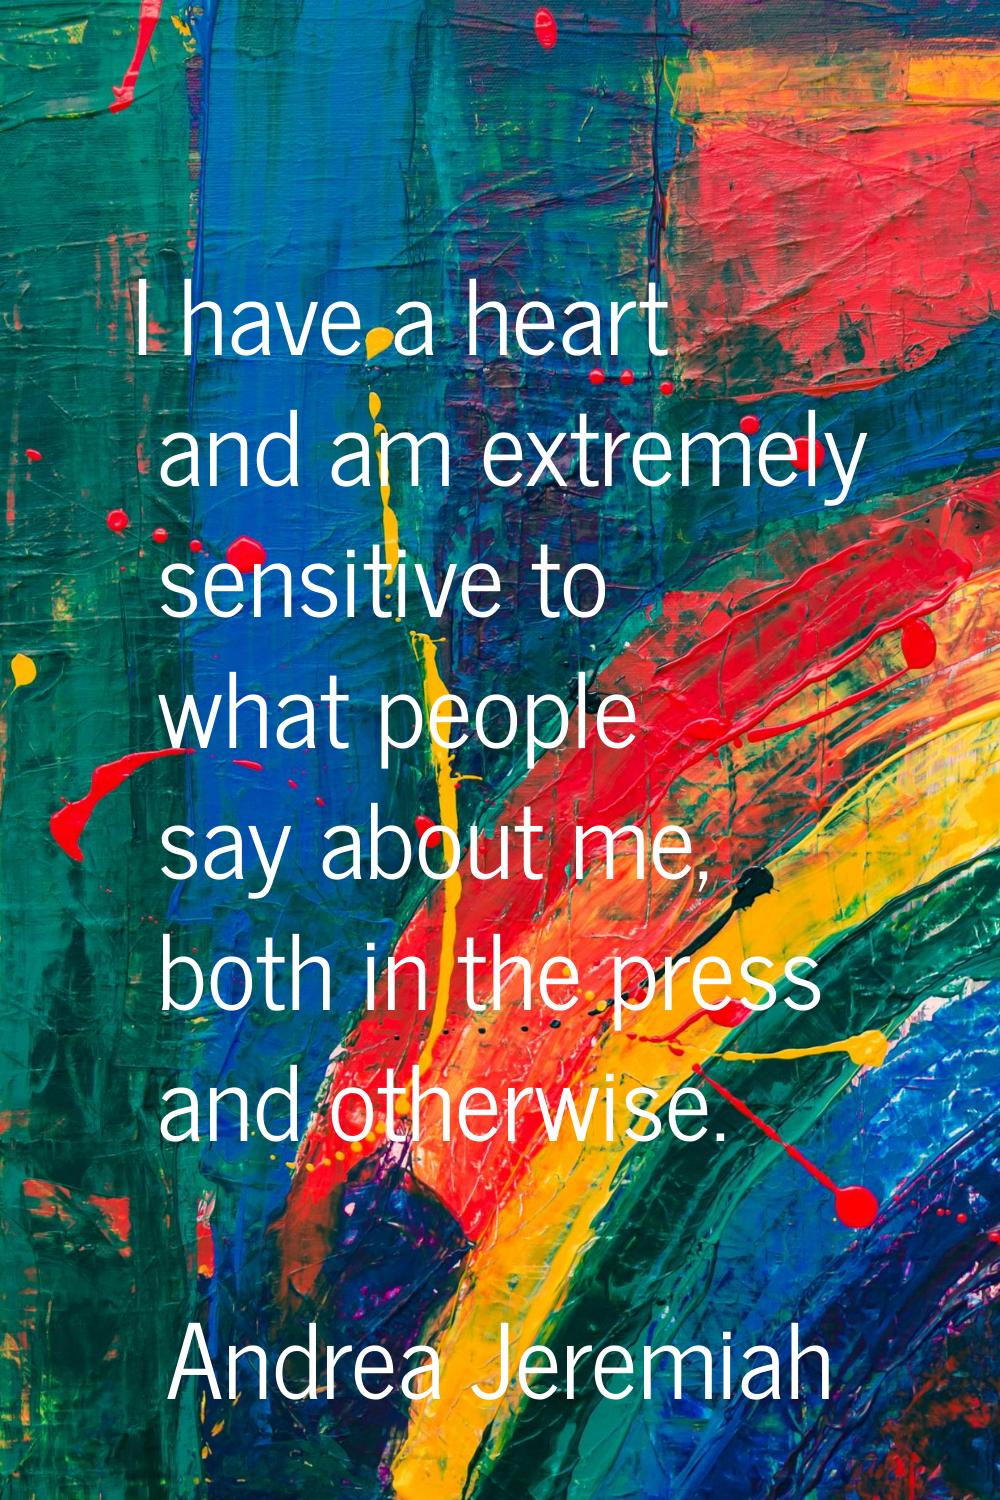 I have a heart and am extremely sensitive to what people say about me, both in the press and otherw